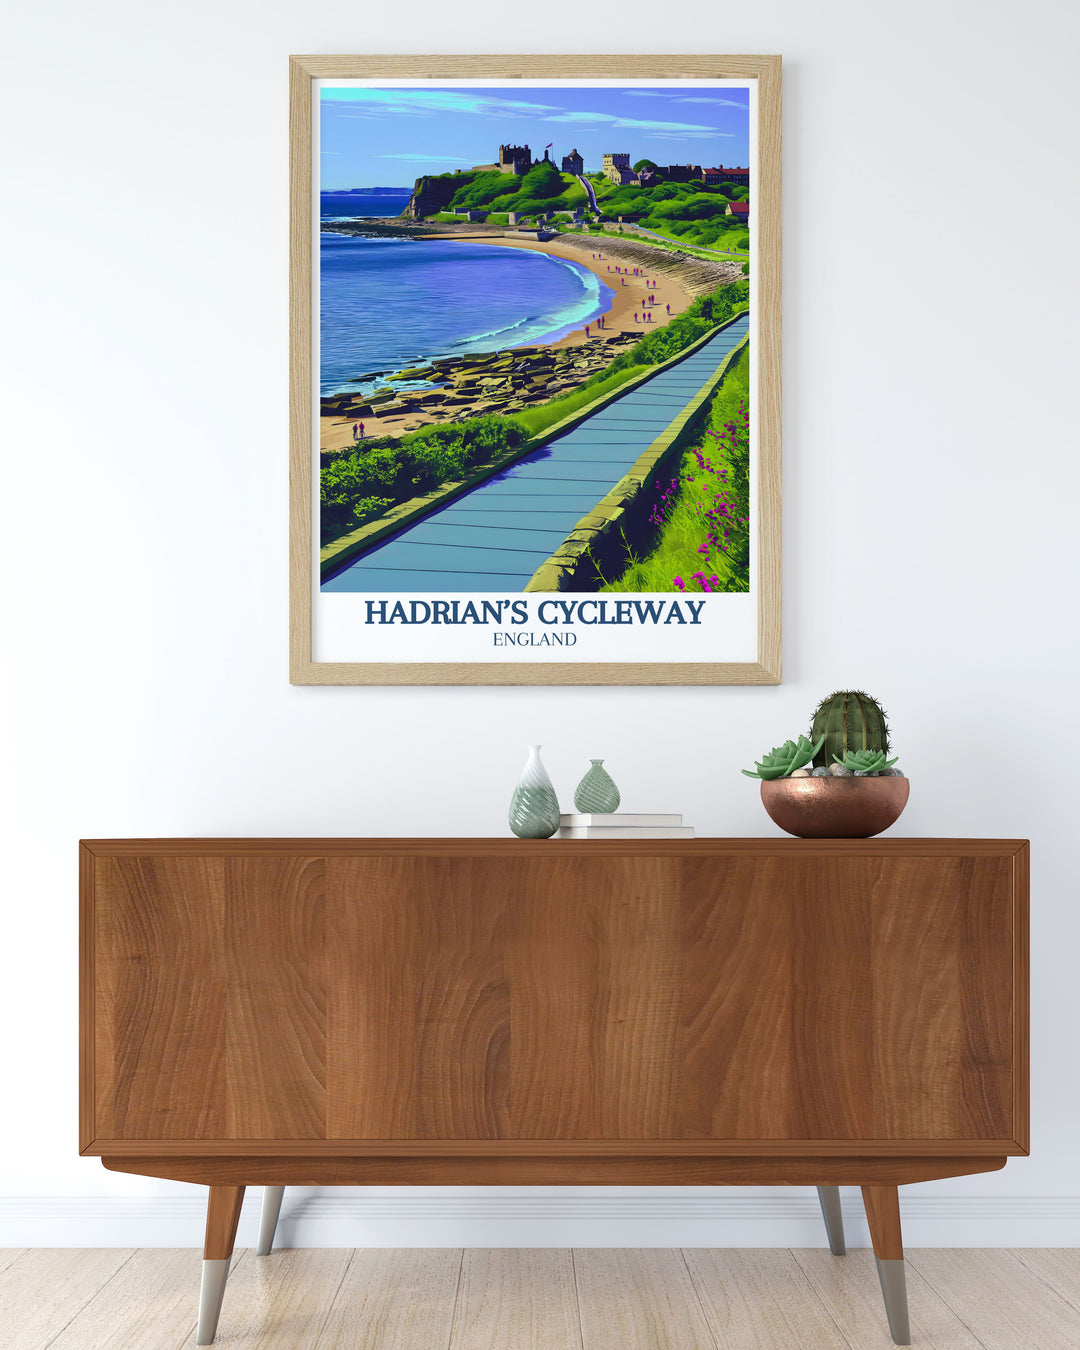 A picturesque view of Tynemouth Priory and Castle, this art print captures the essence of Englands historic route, making it a standout piece for home decor.